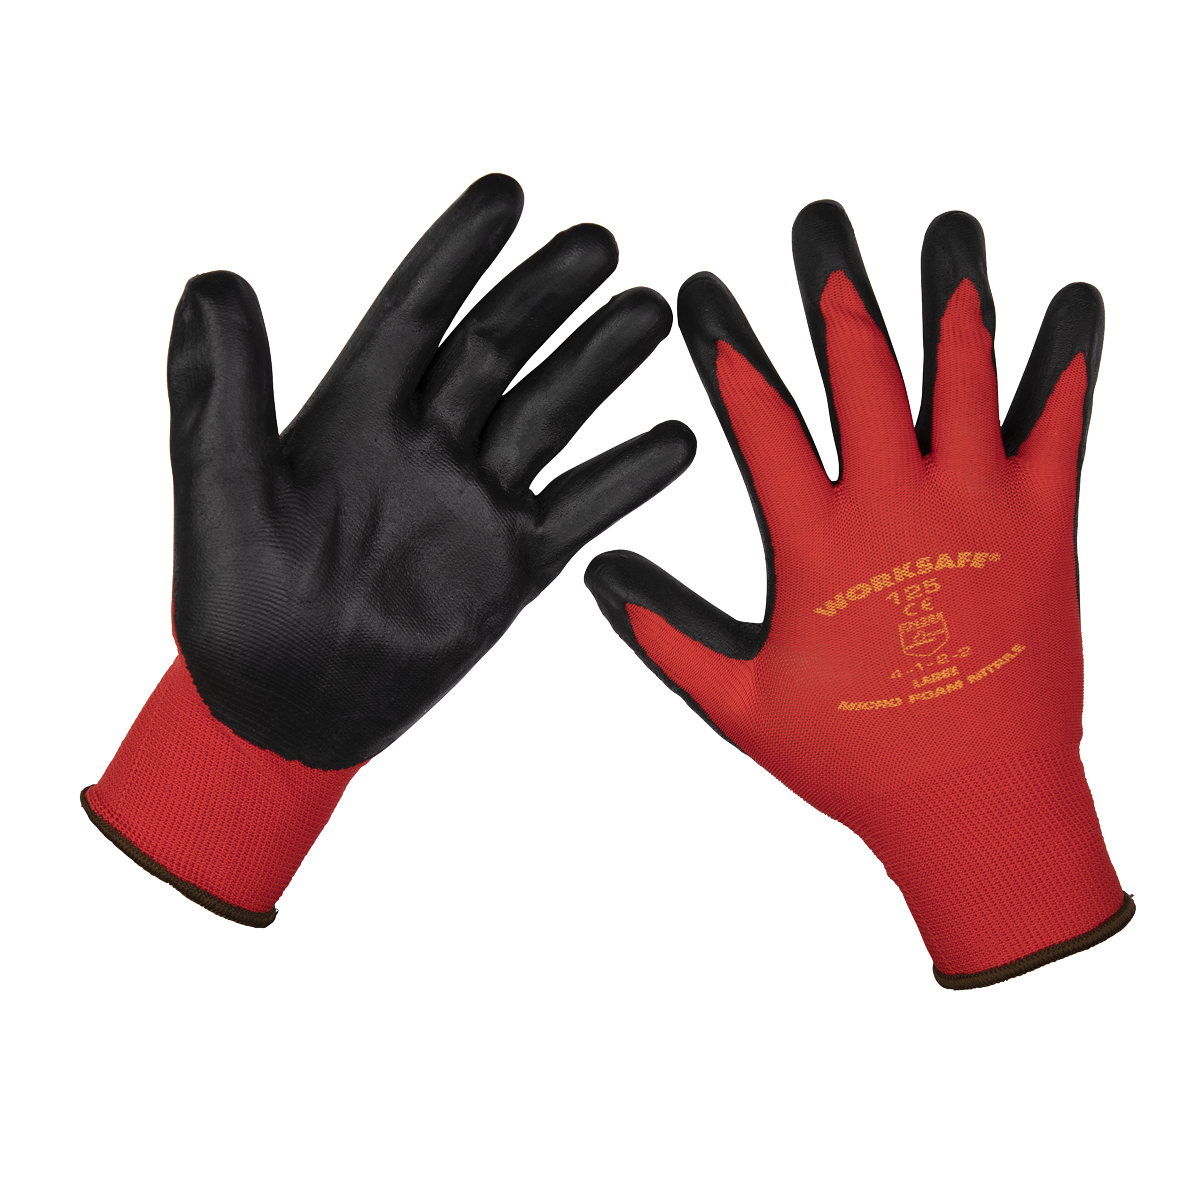 Flexi Grip Nitrile Palm Gloves (Large) - Pack of 6 Pairs - TSP125L/6 - Farming Parts